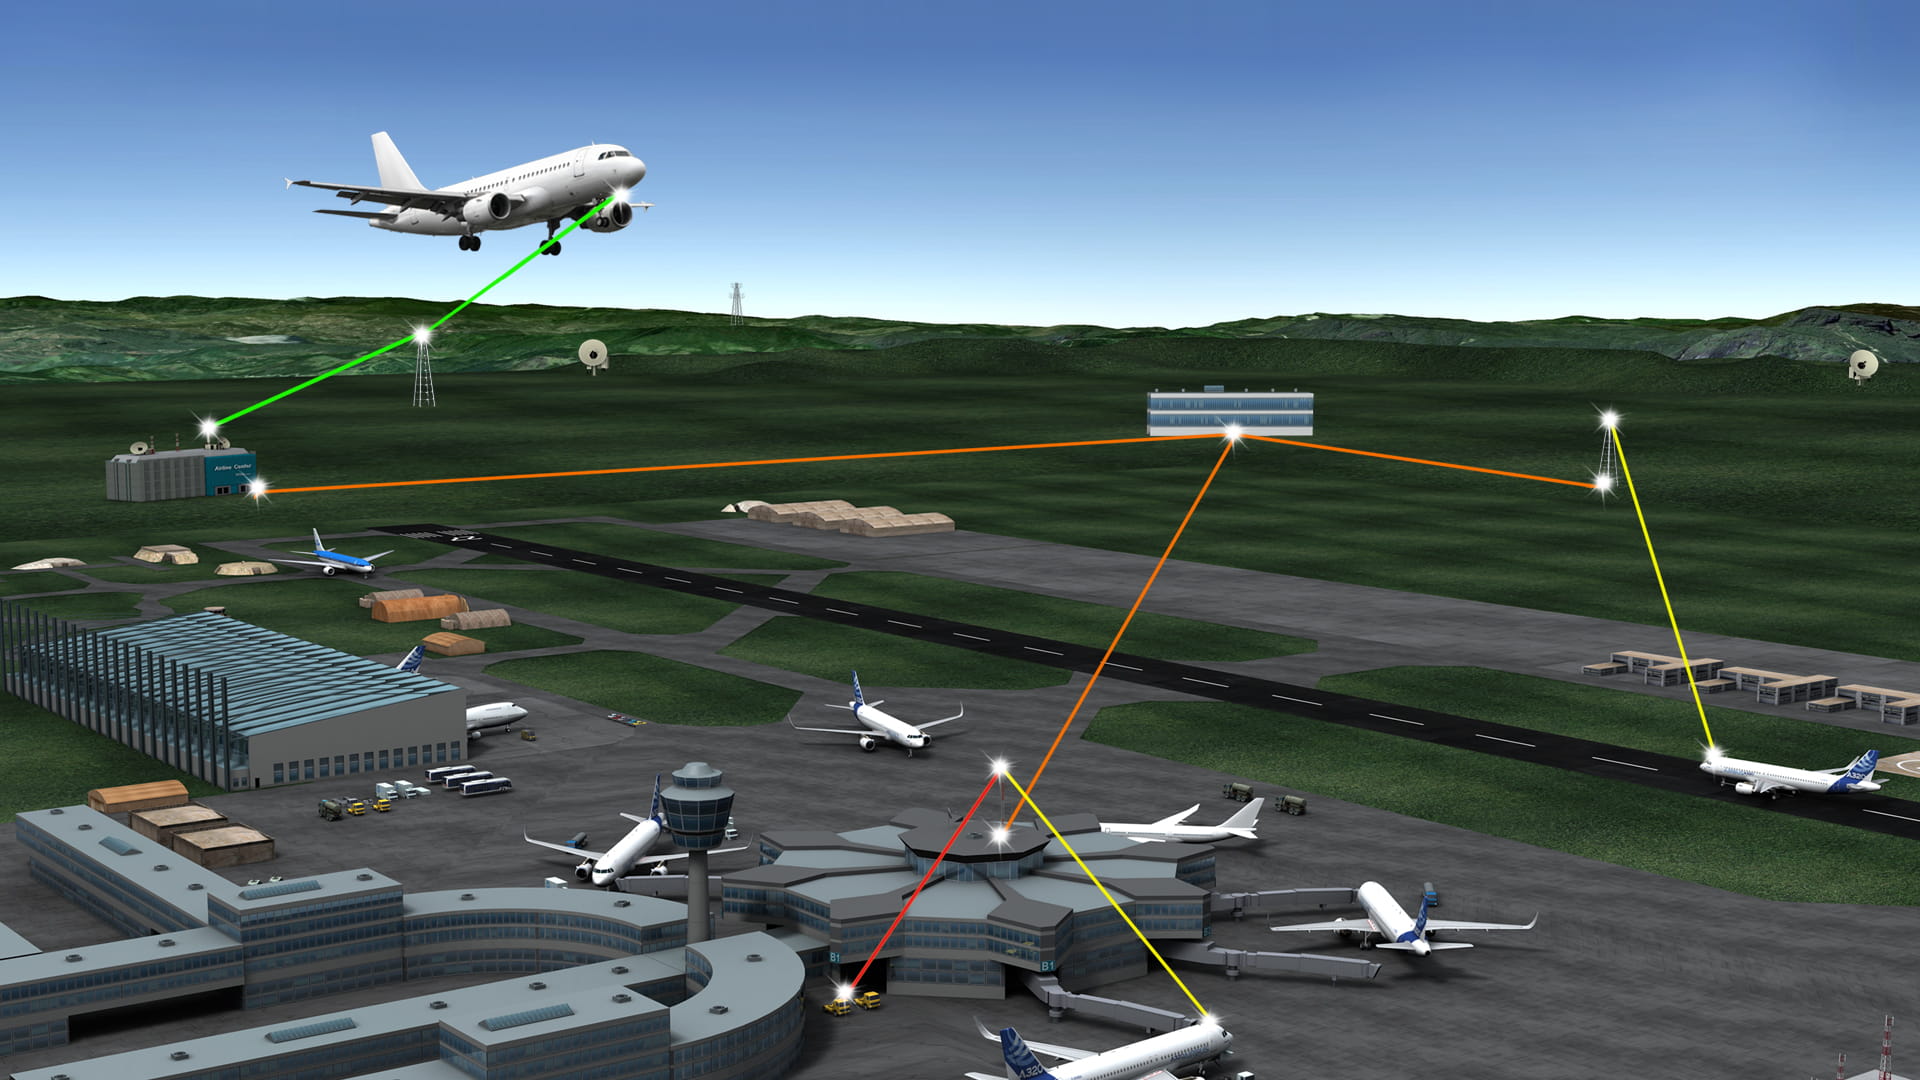 a rendering of an airplane flying over an airport terminal